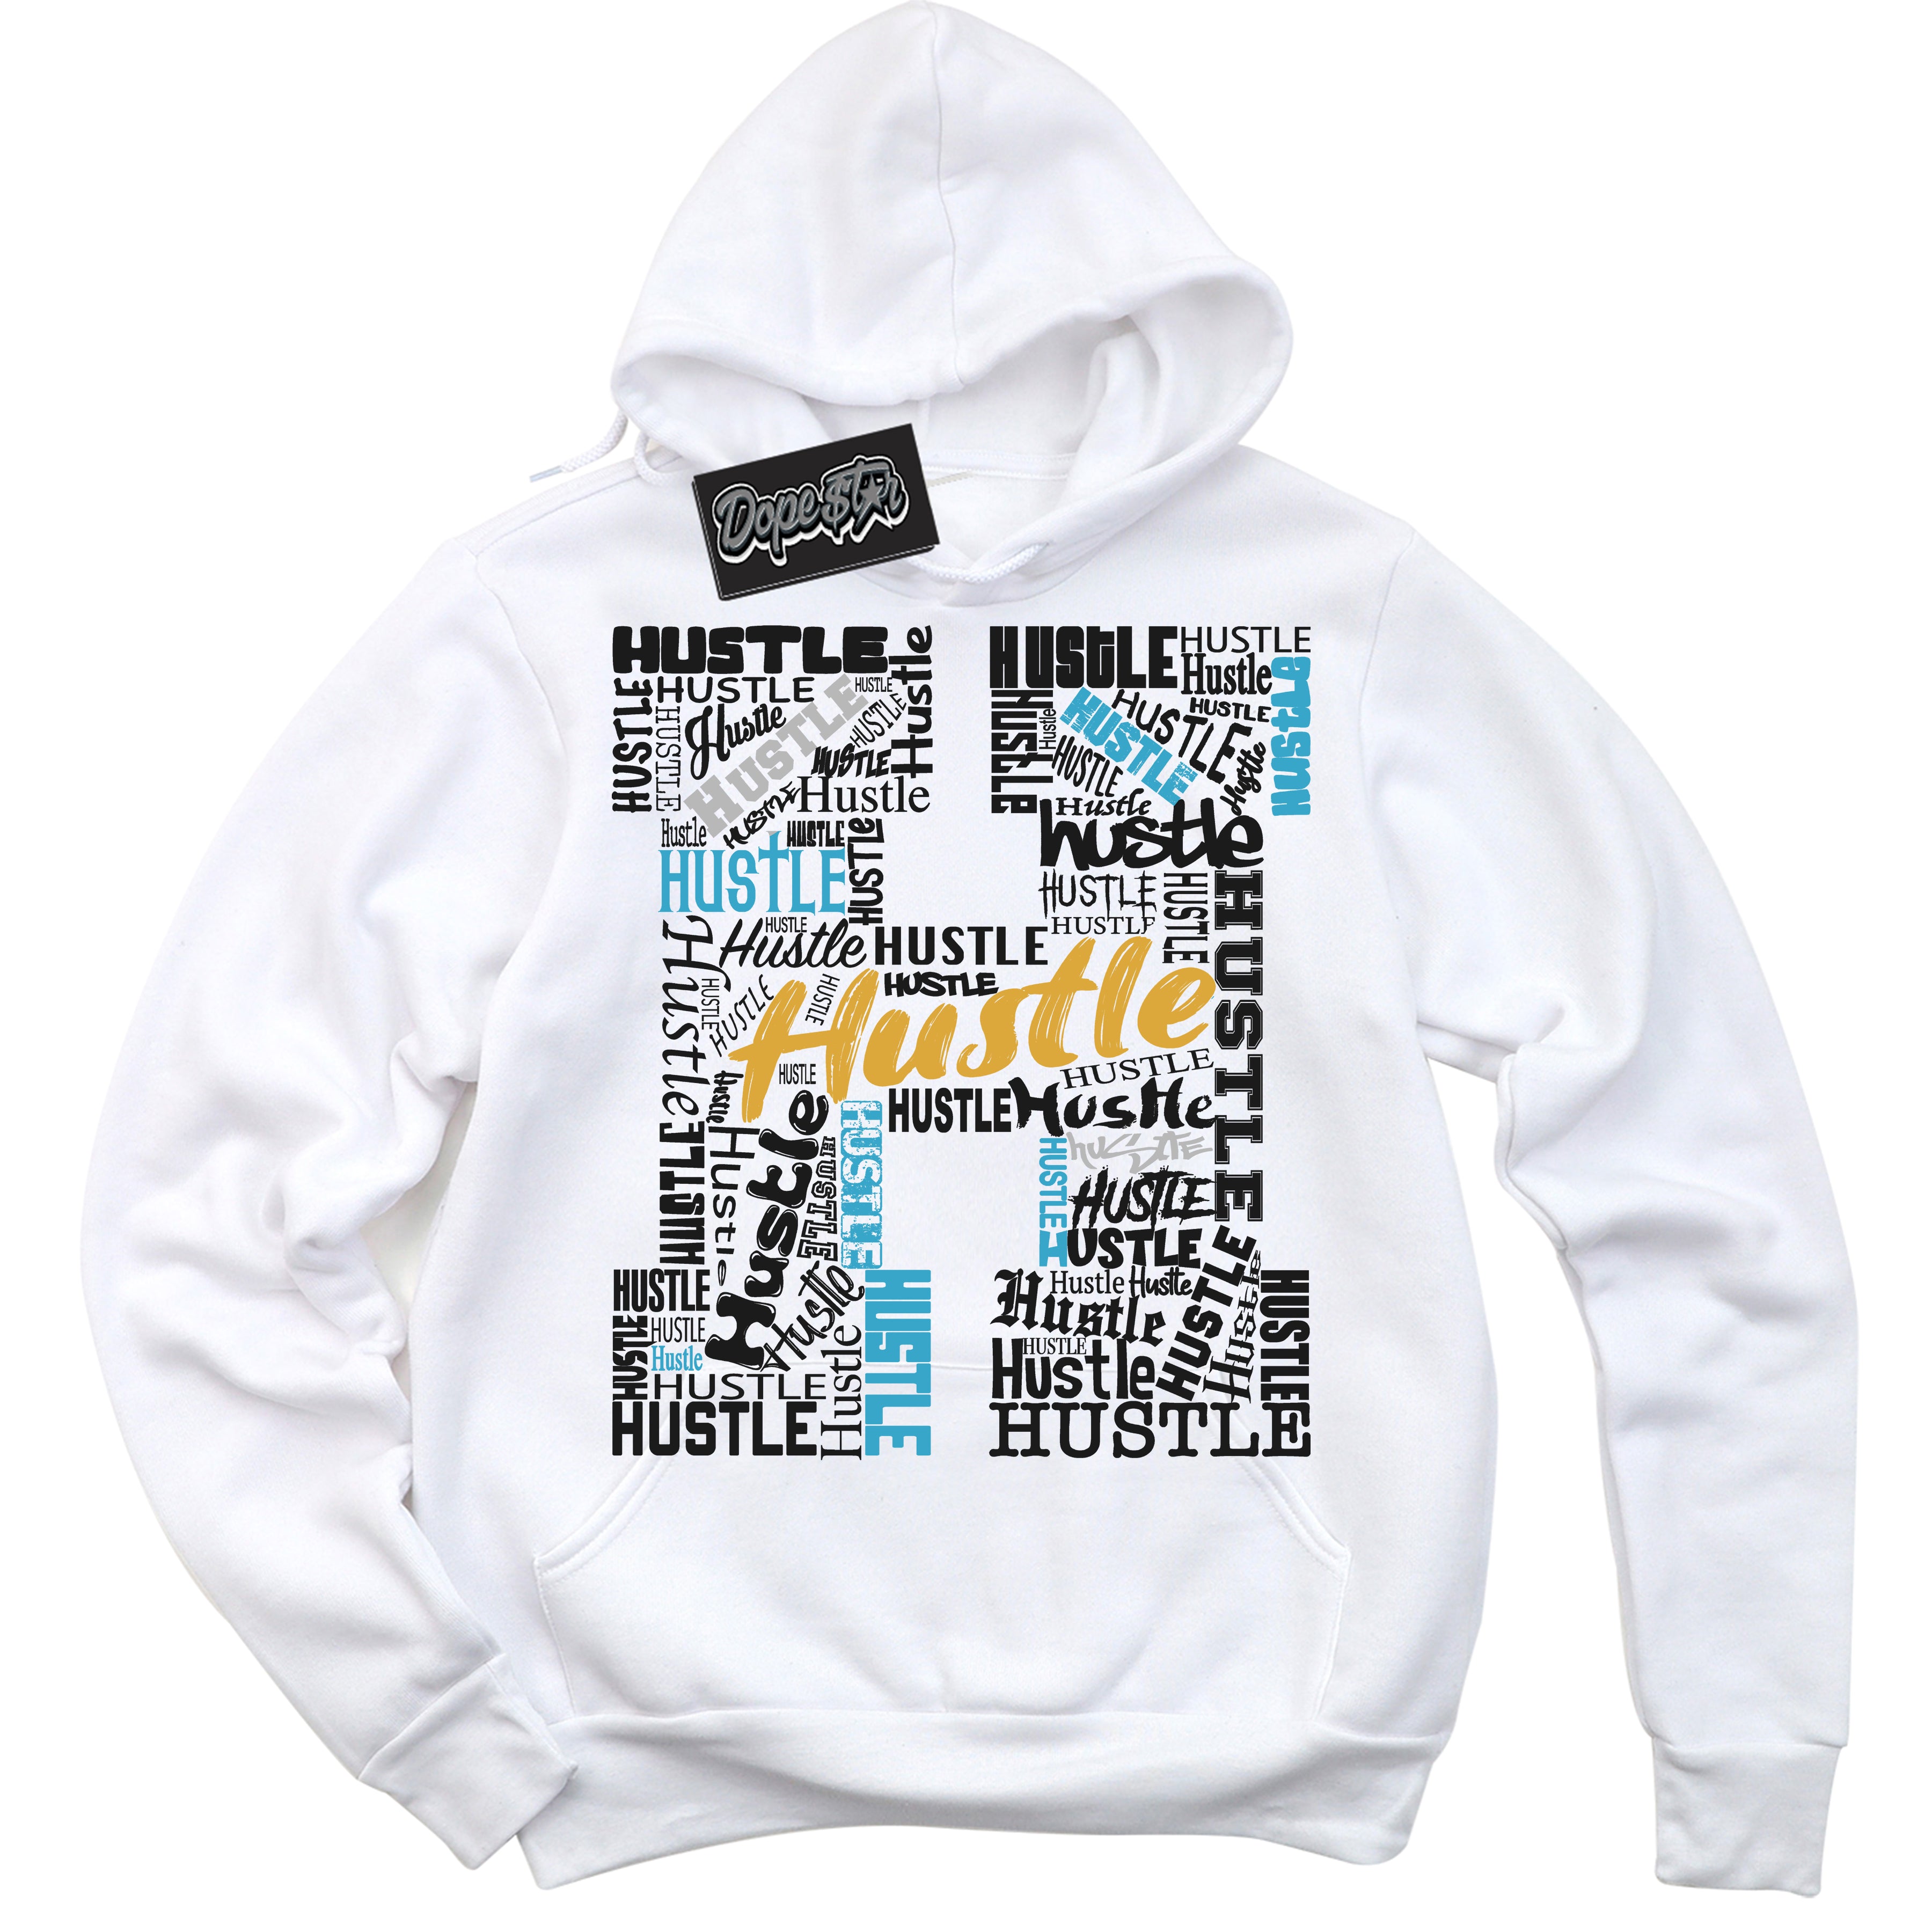 Cool White Graphic Hoodie with “ Hustle H“ print, that perfectly matches Air Jordan 5 AQUA  sneakers